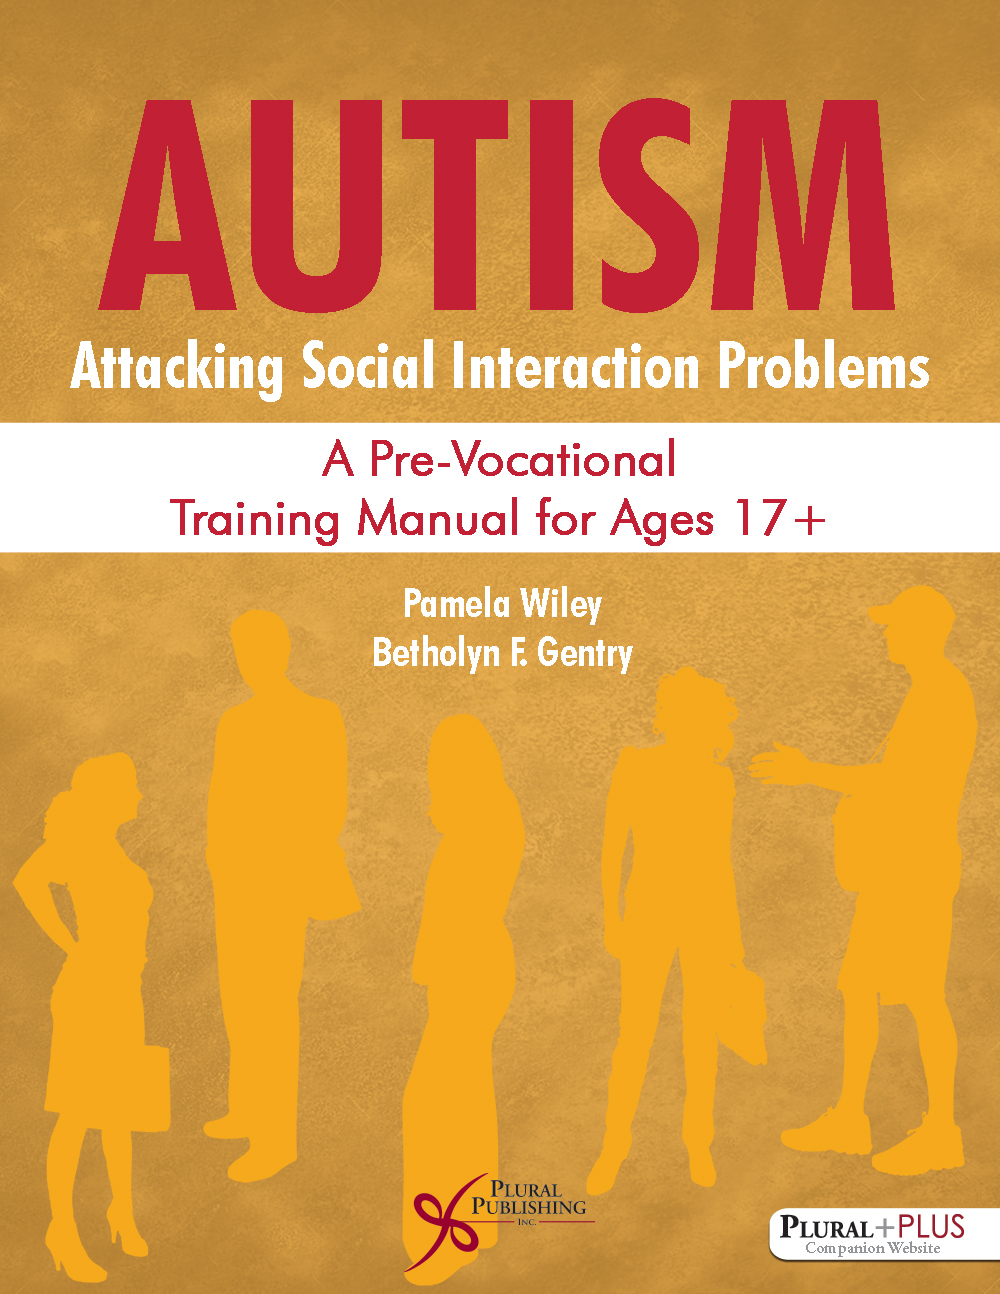 References - Interventions for Autism - Wiley Online Library